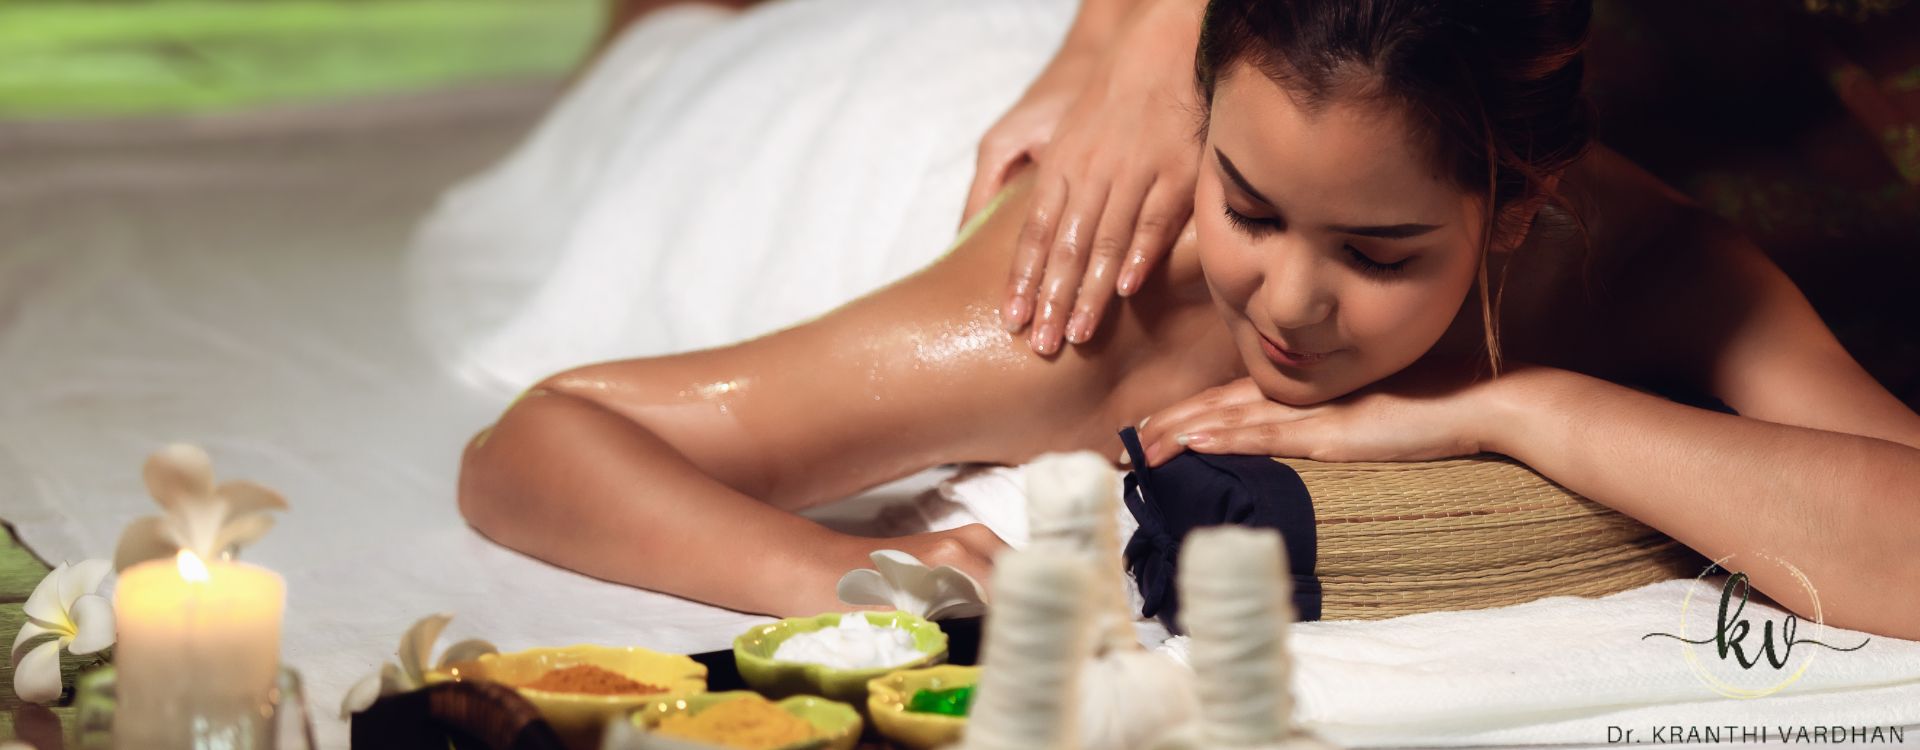 Ayurvedic Massage in Hyderabad: Benefits and Top Places to Try It